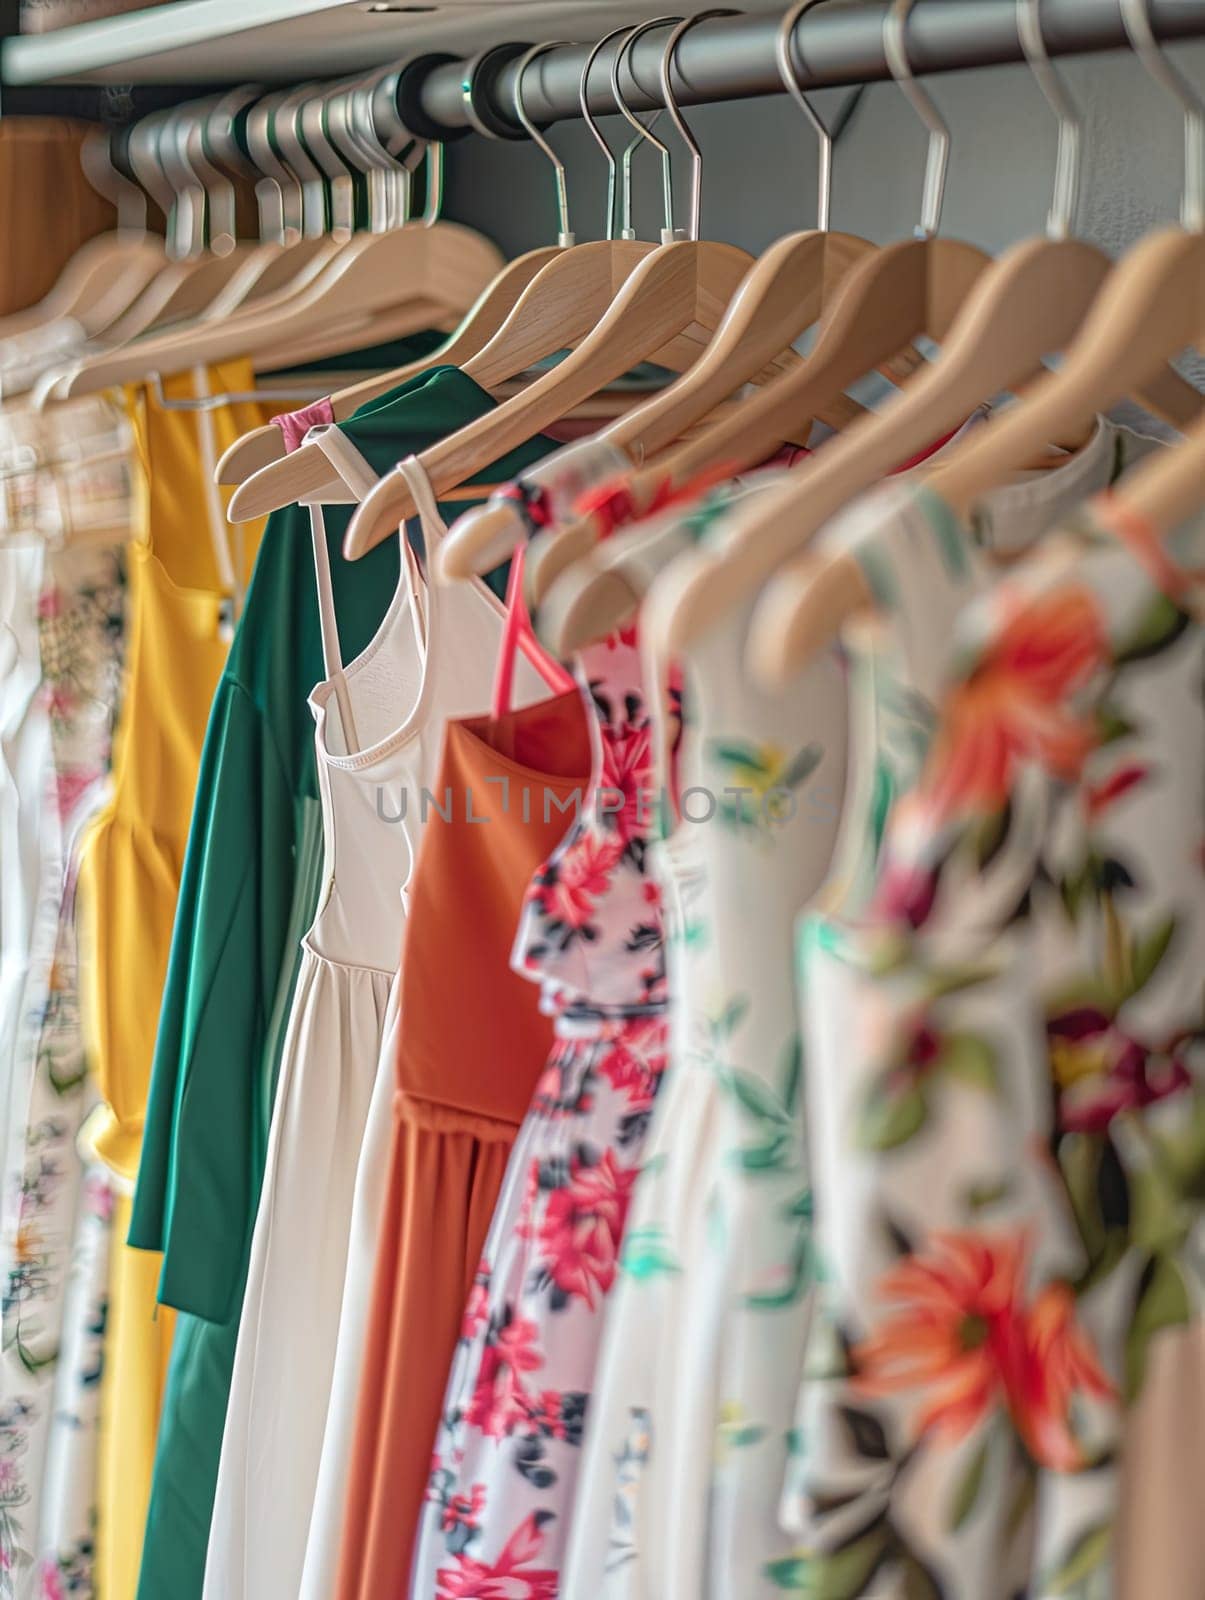 Display of various dresses and shirts hanging on a rack in a womens clothing store for summer.